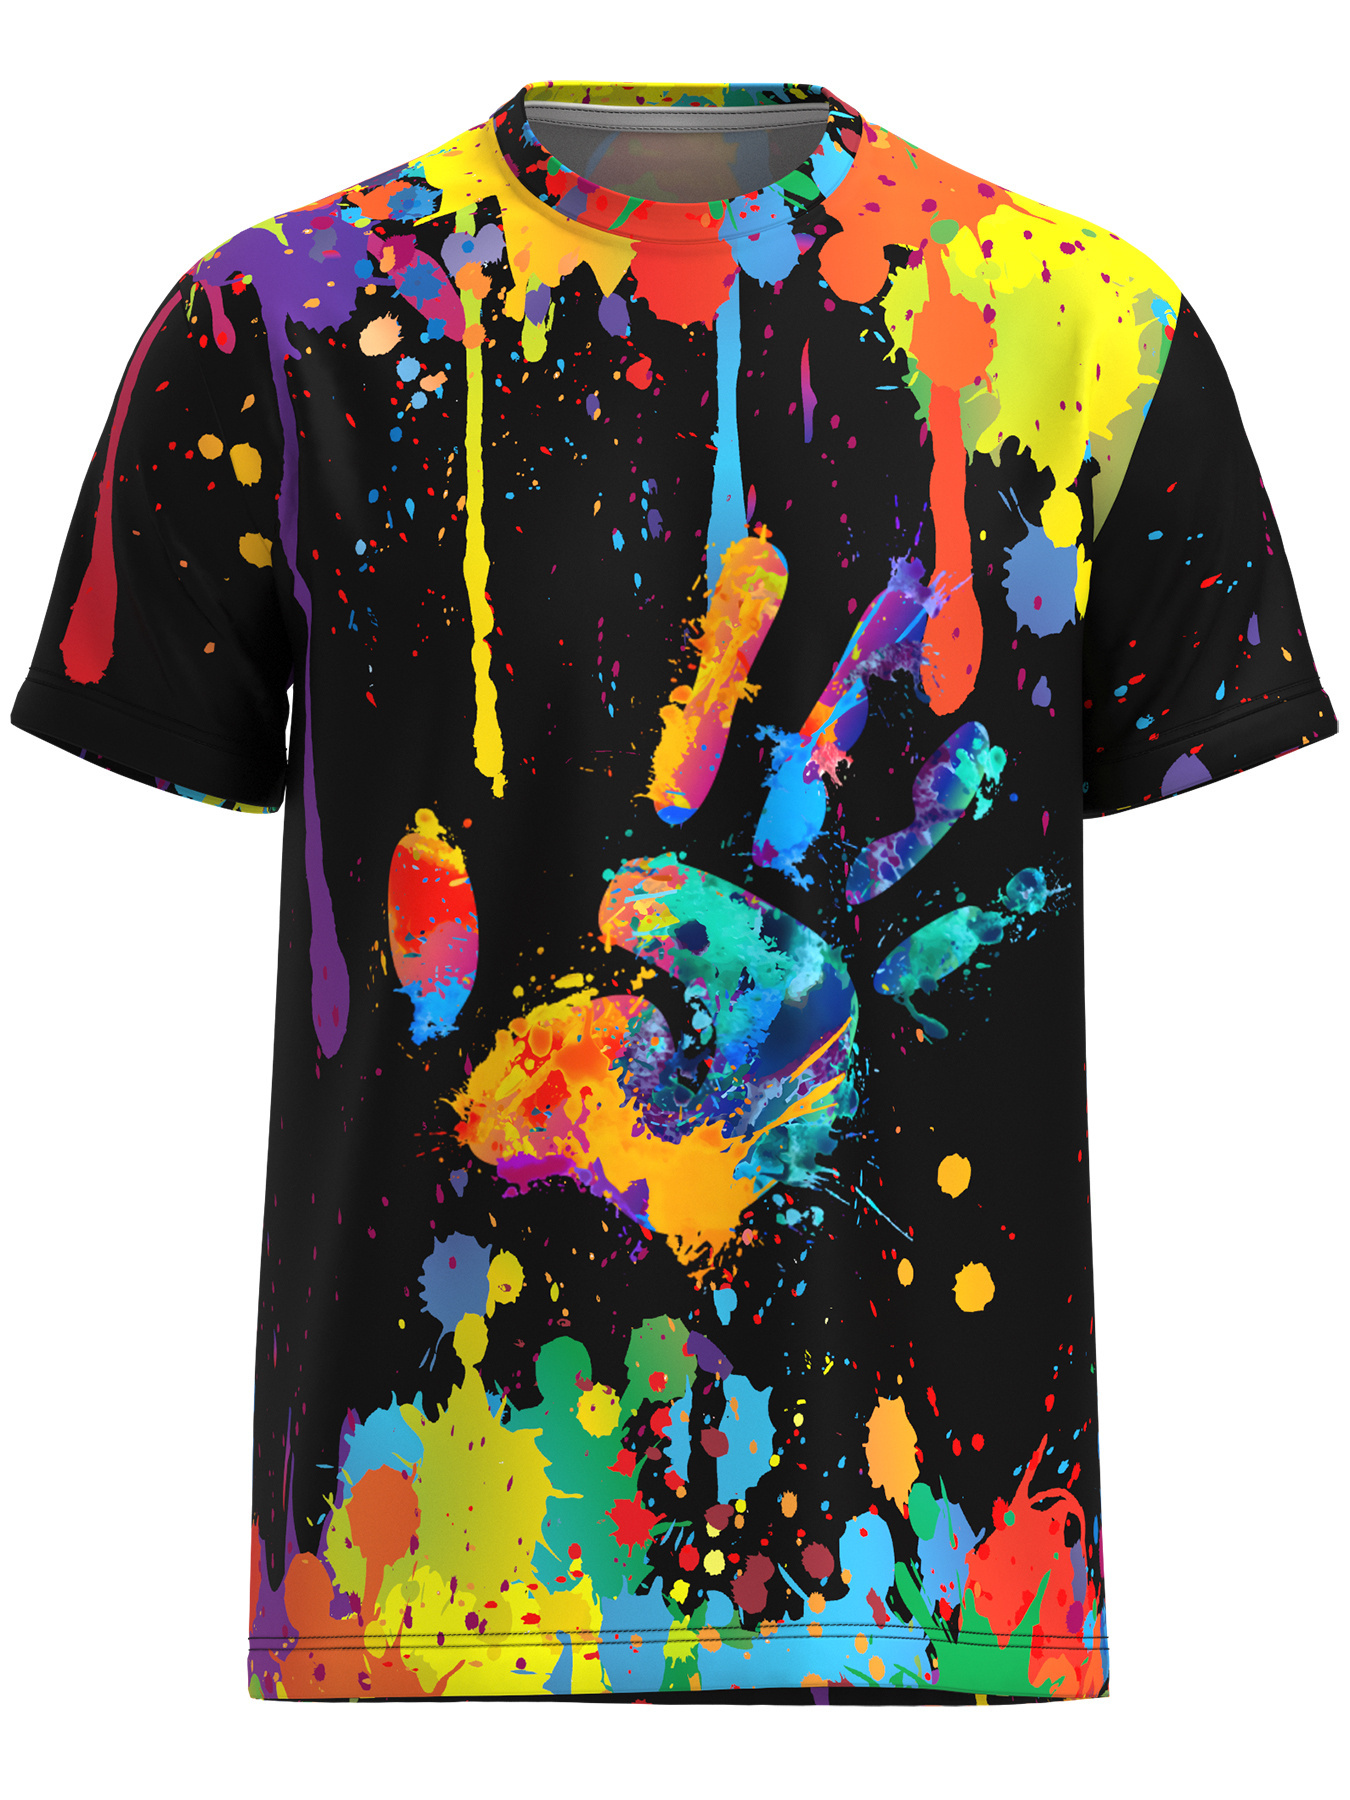 Colorful Pattern Print Men's Short Sleeve Comfy T-shirt, Graphic